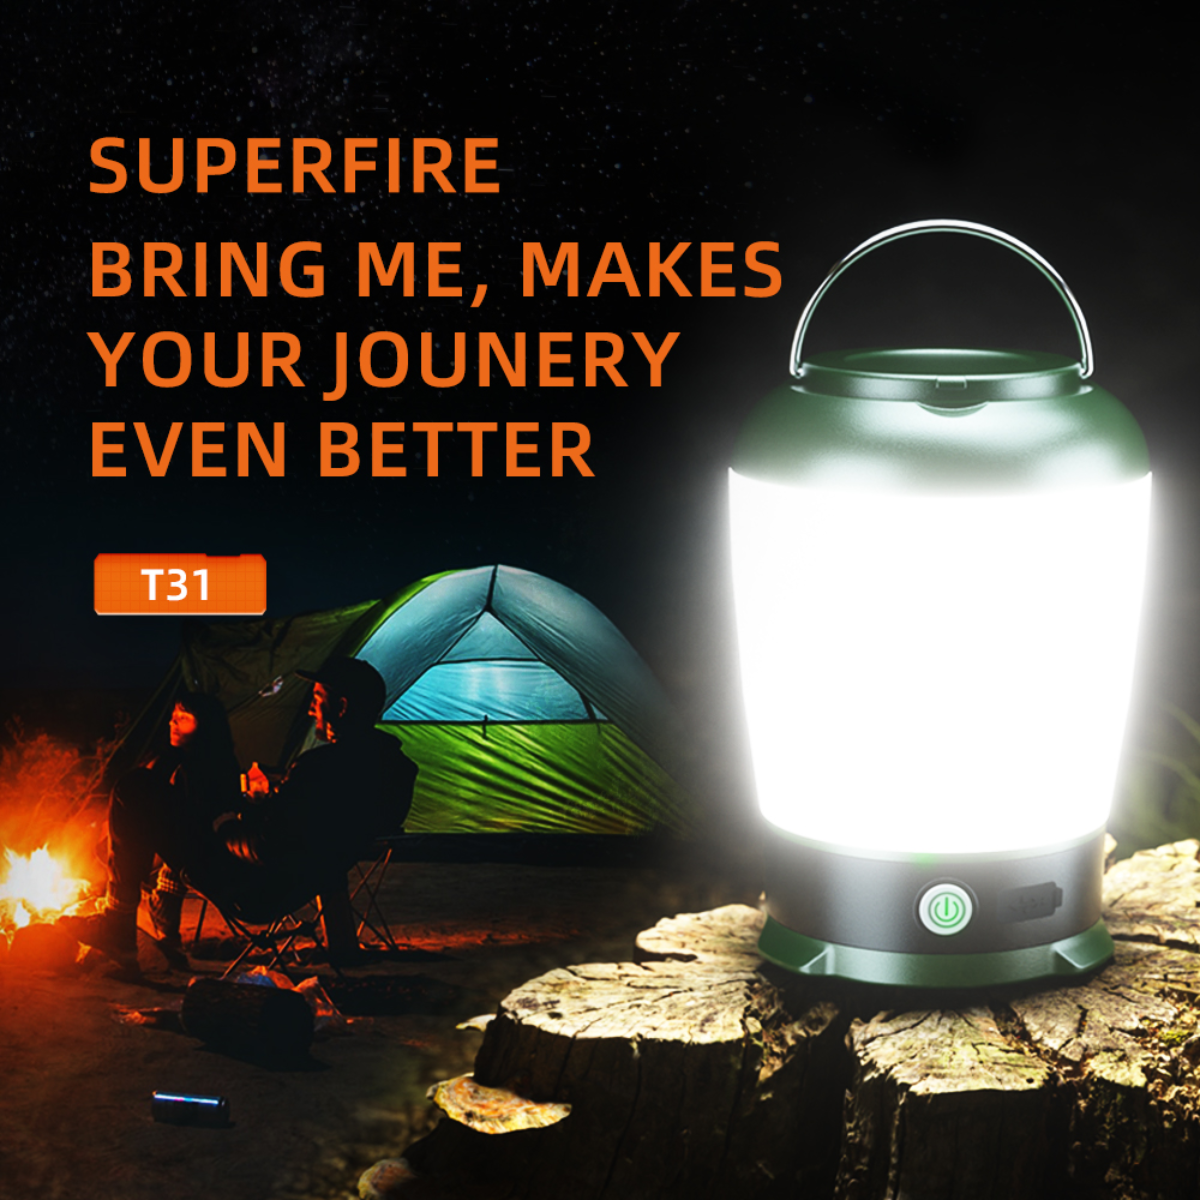 SUPERFIRE: The Powerful Camping Light Is Perfect for Outdoors